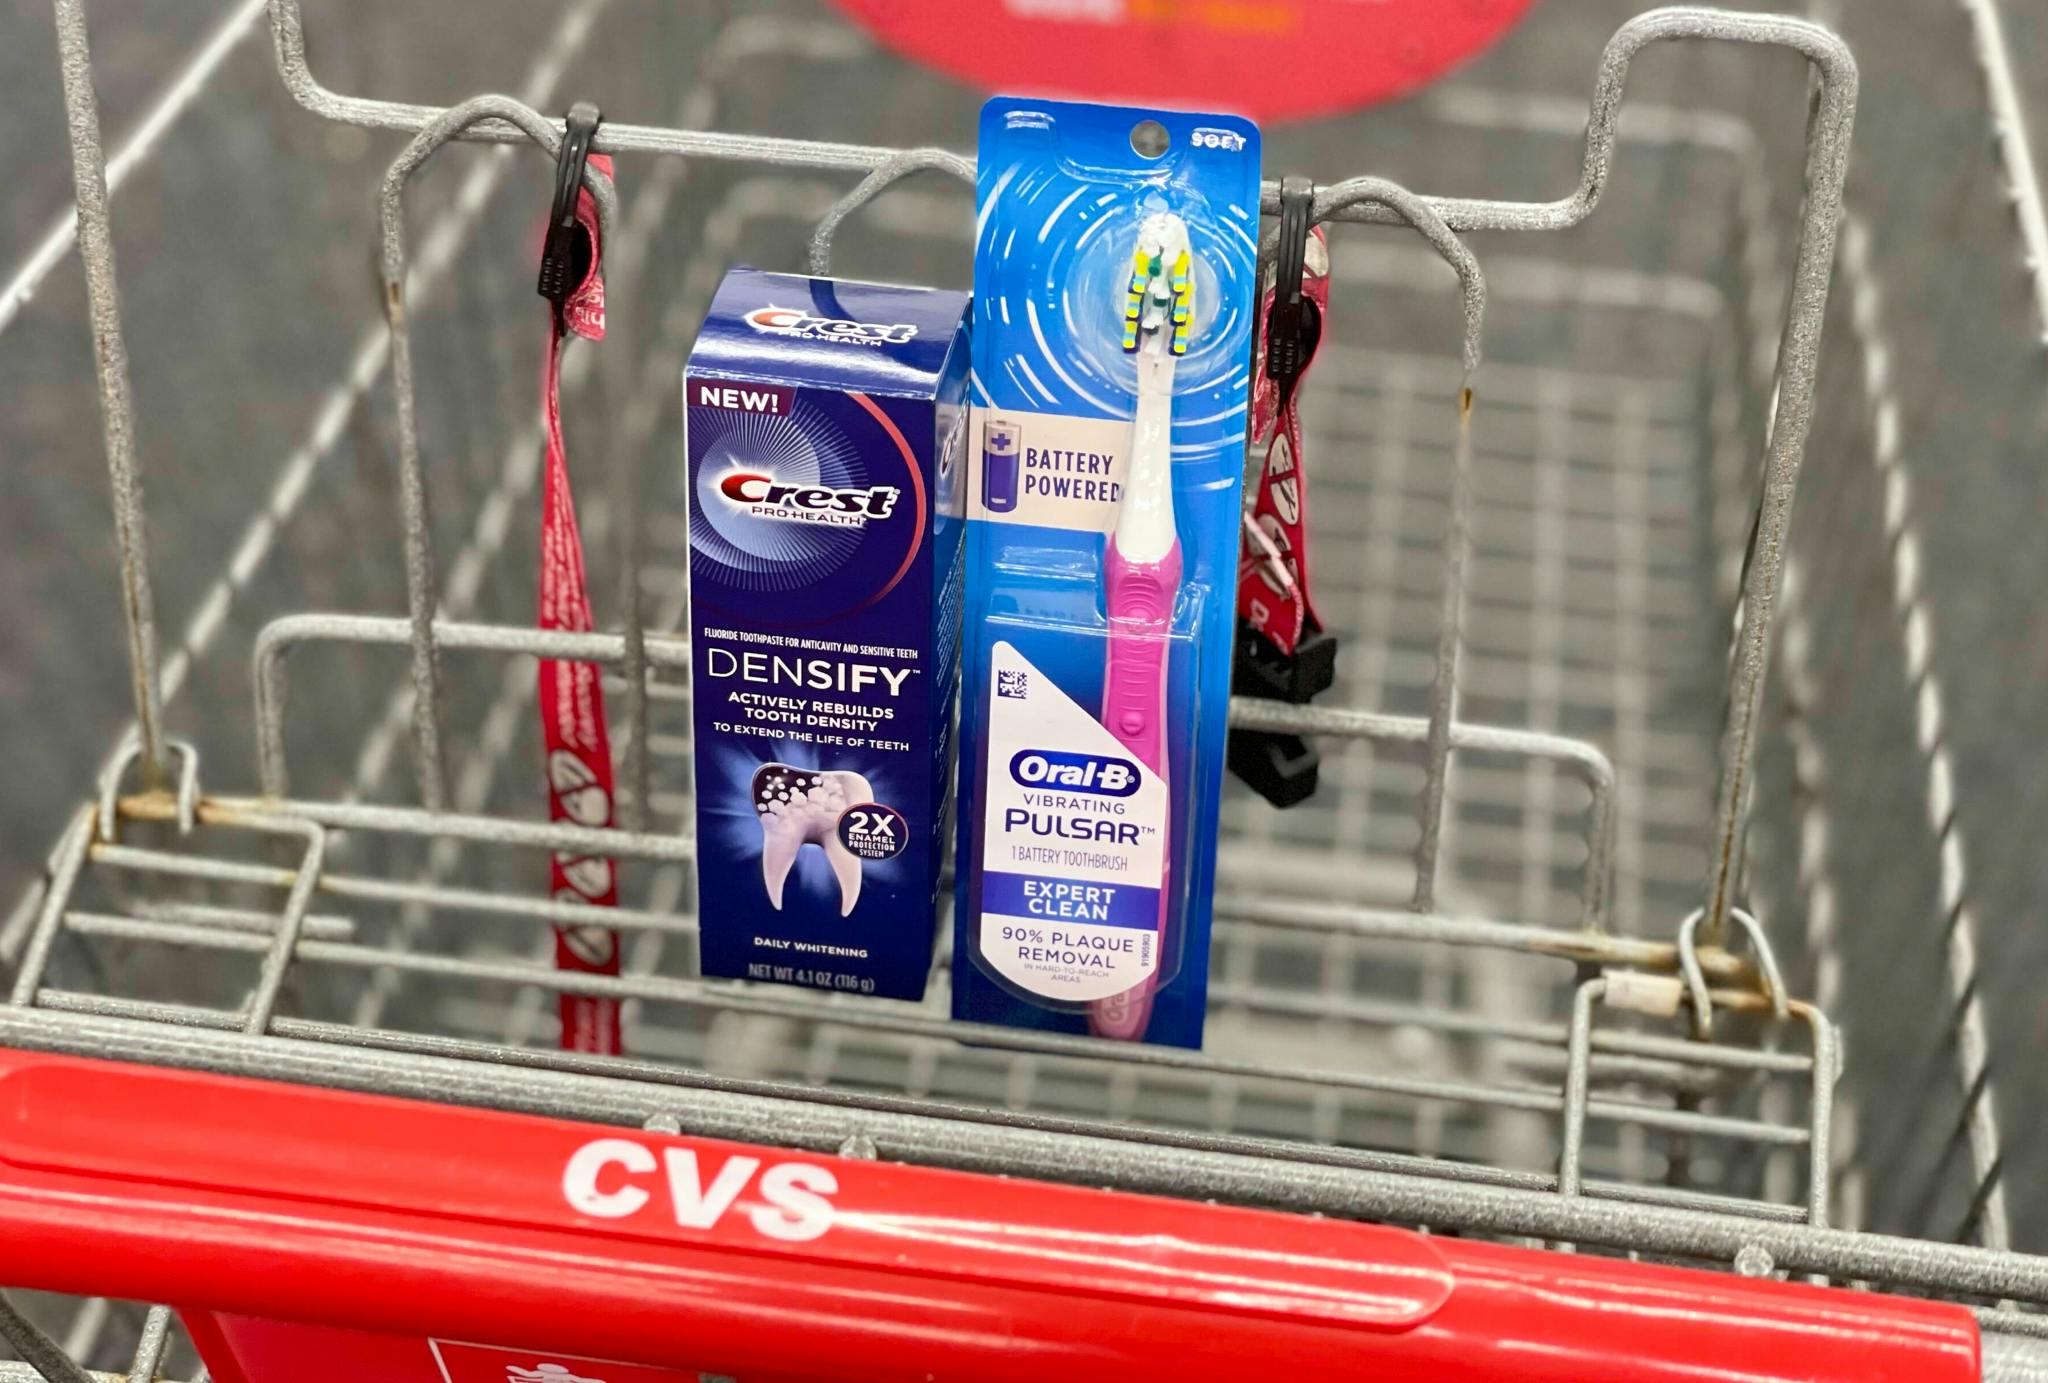 crest and oral-b in cvs cart